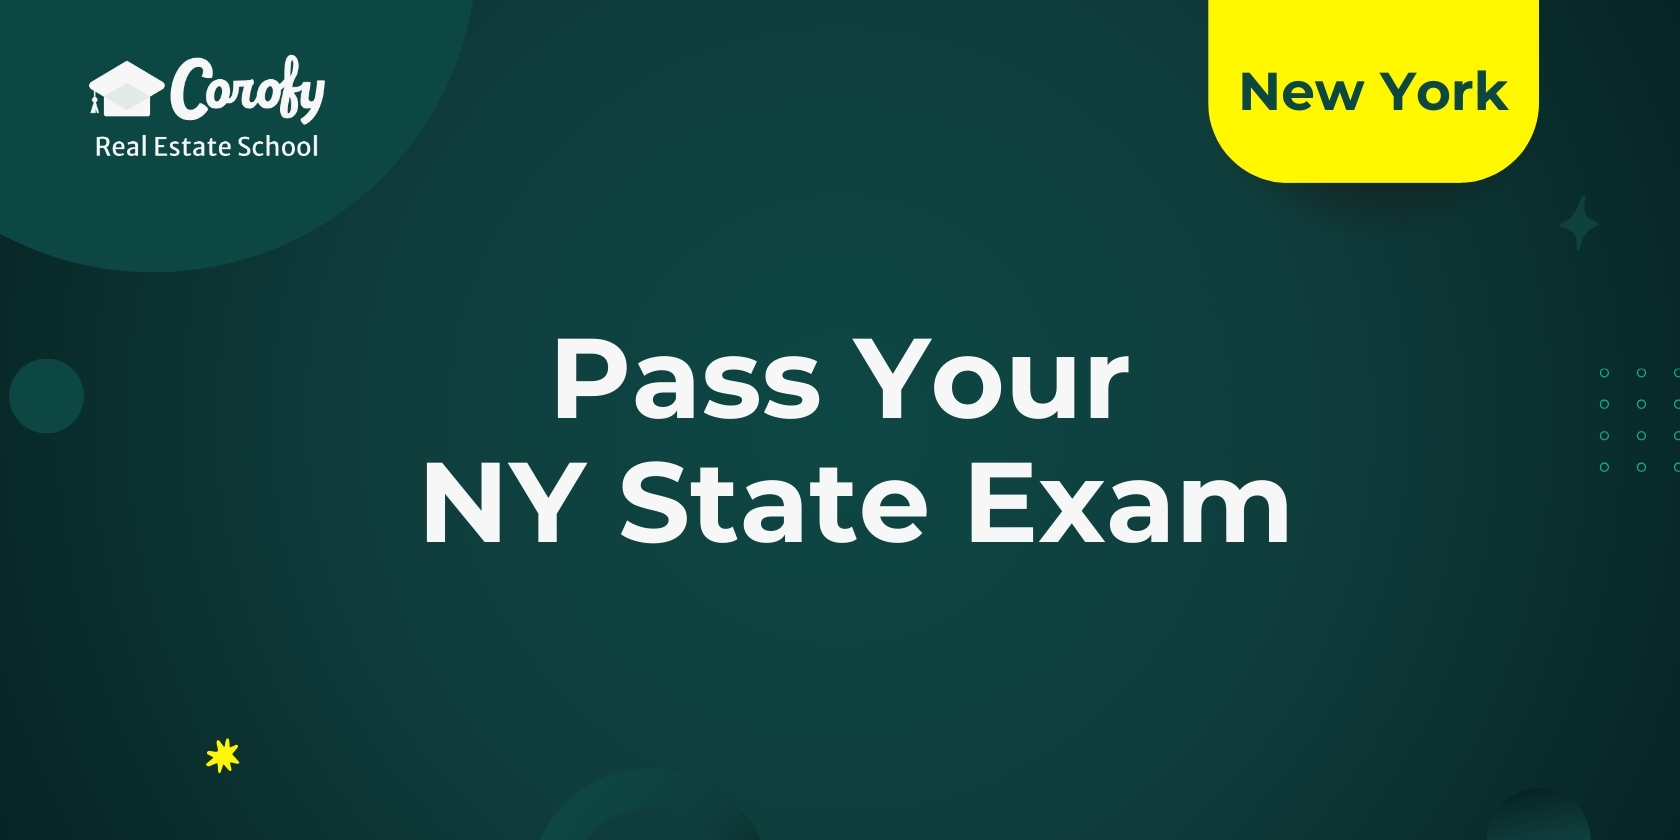 Pass Your NY State Exam